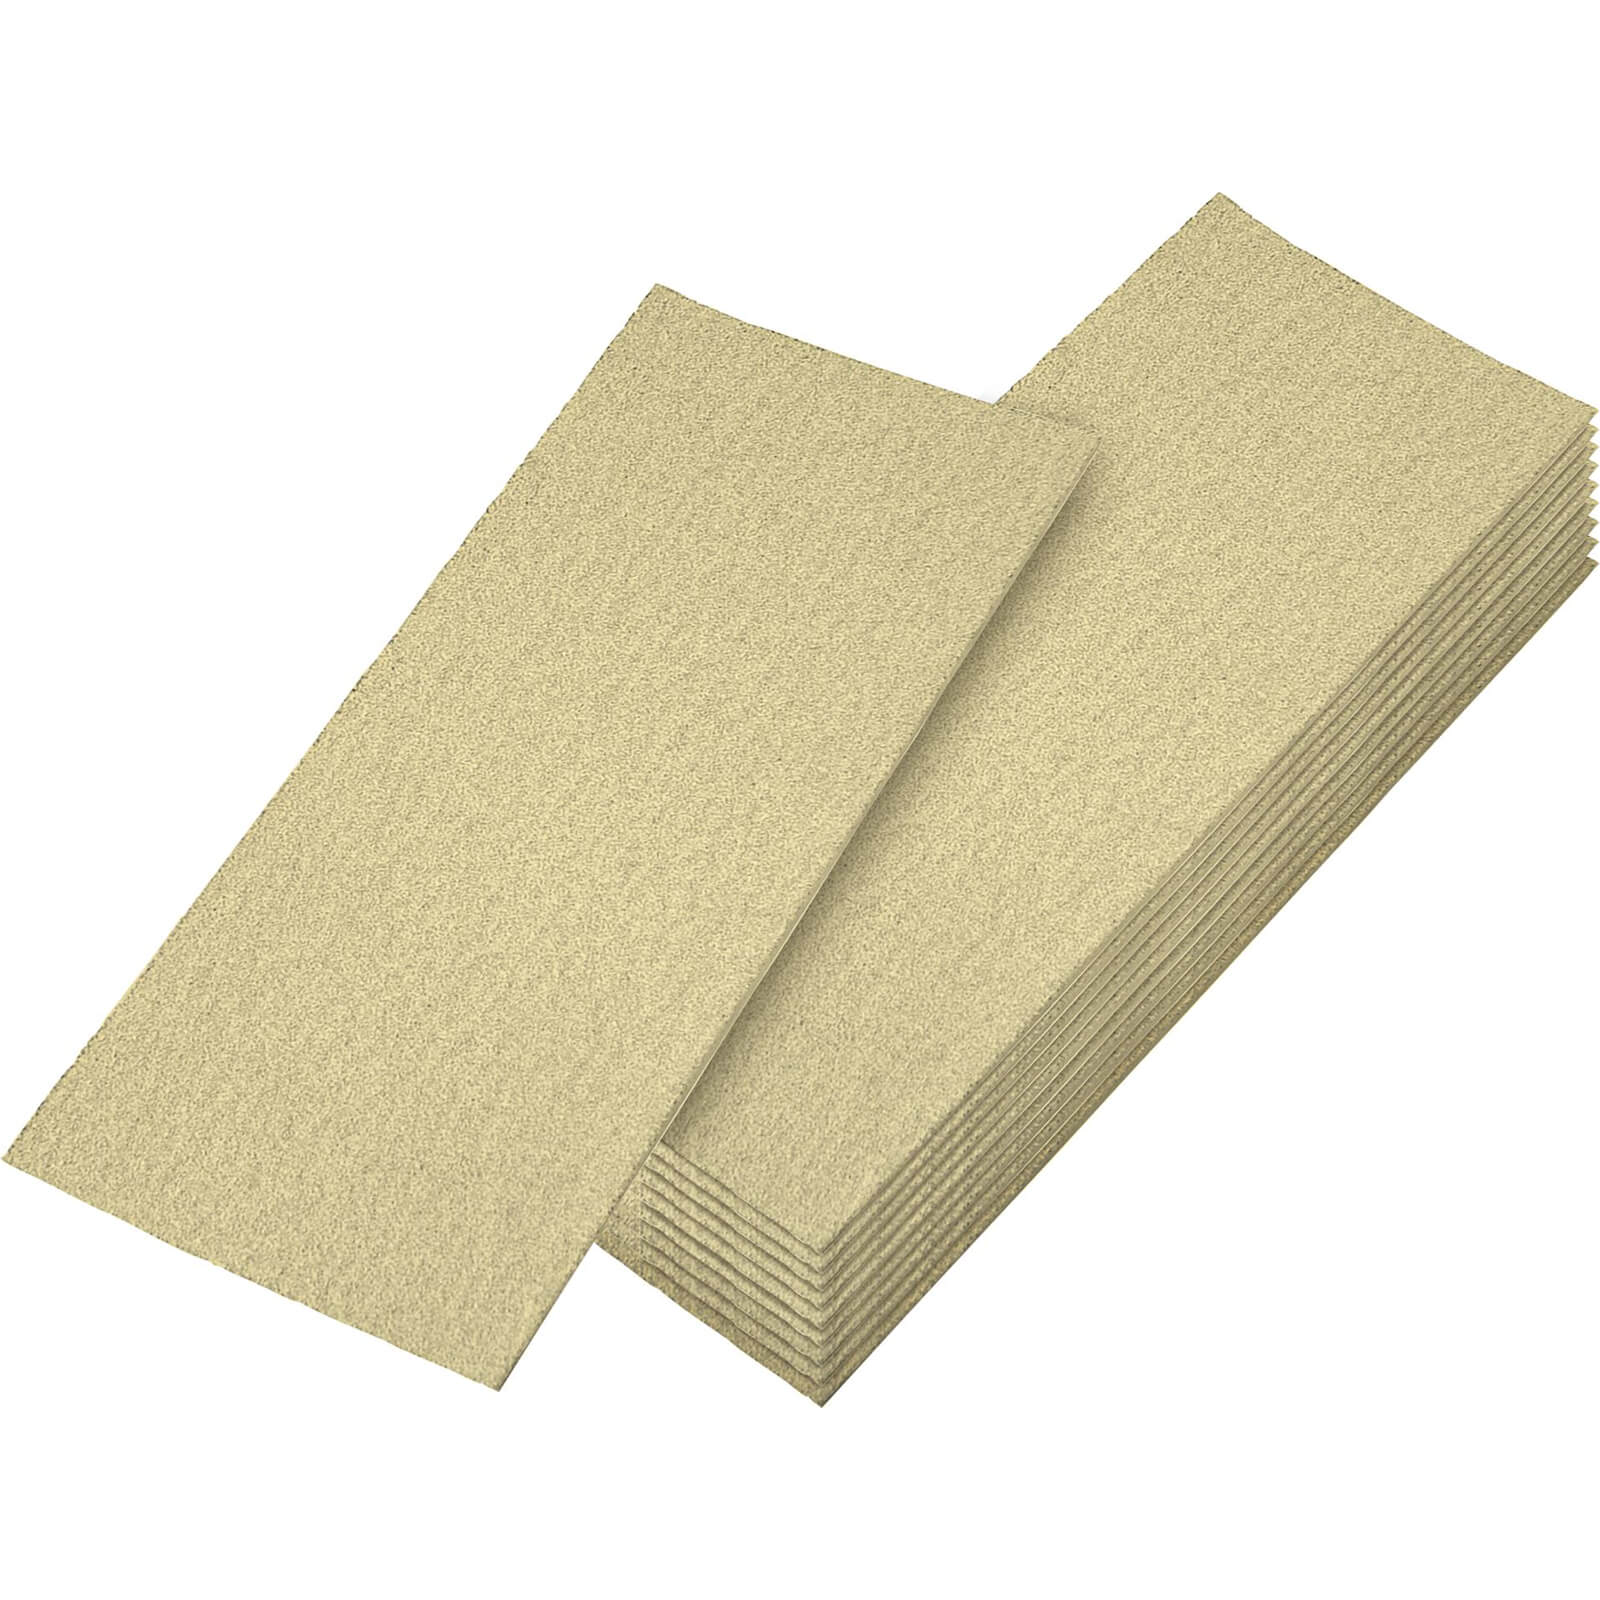 Photo of Faithfull Clip On 1/2 Sanding Sheets 115mm X 280mm Coarse Pack Of 5